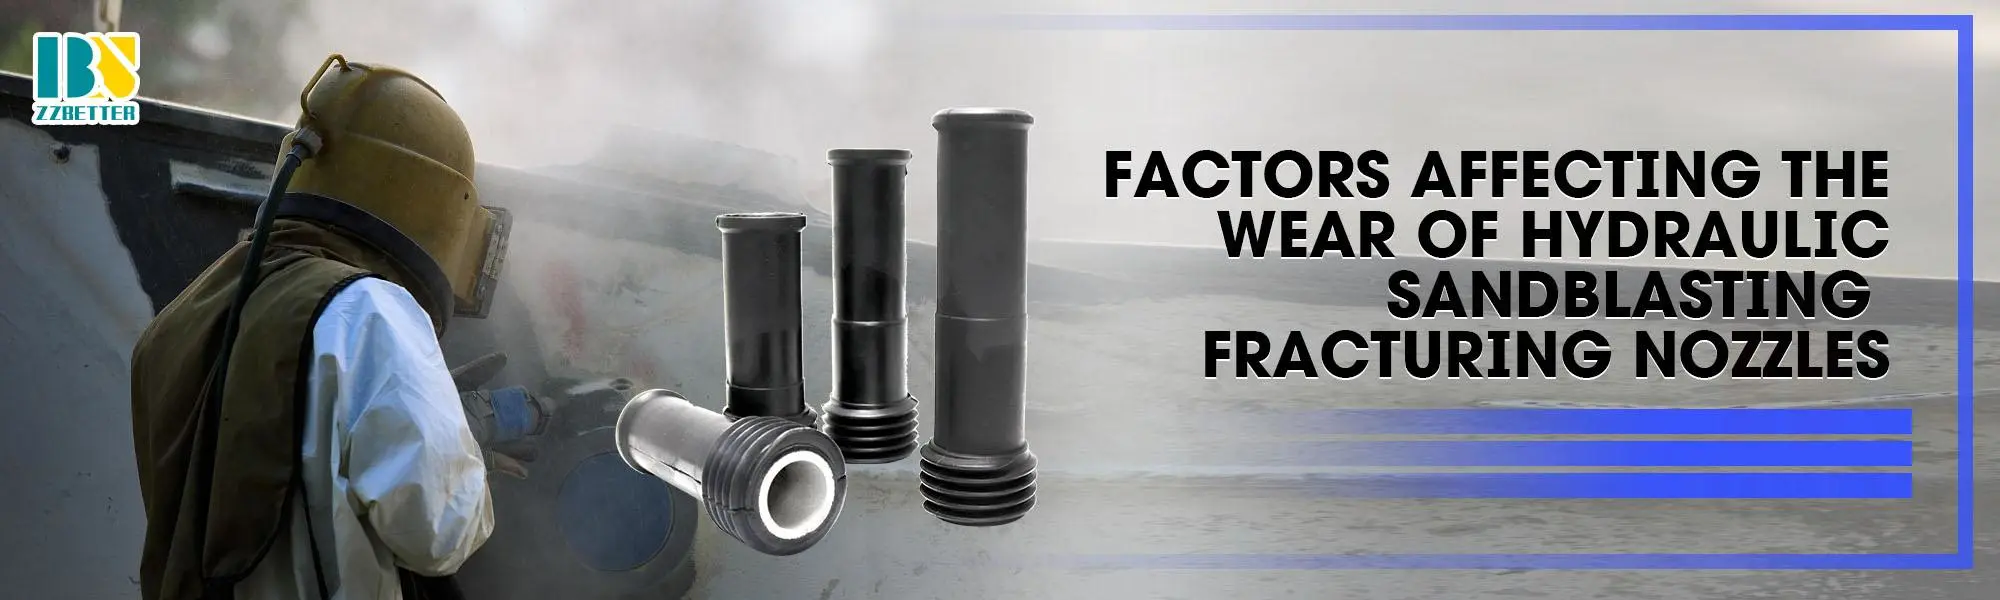 Factors Affecting the Wear of Hydraulic Sandblasting Fracturing Nozzles